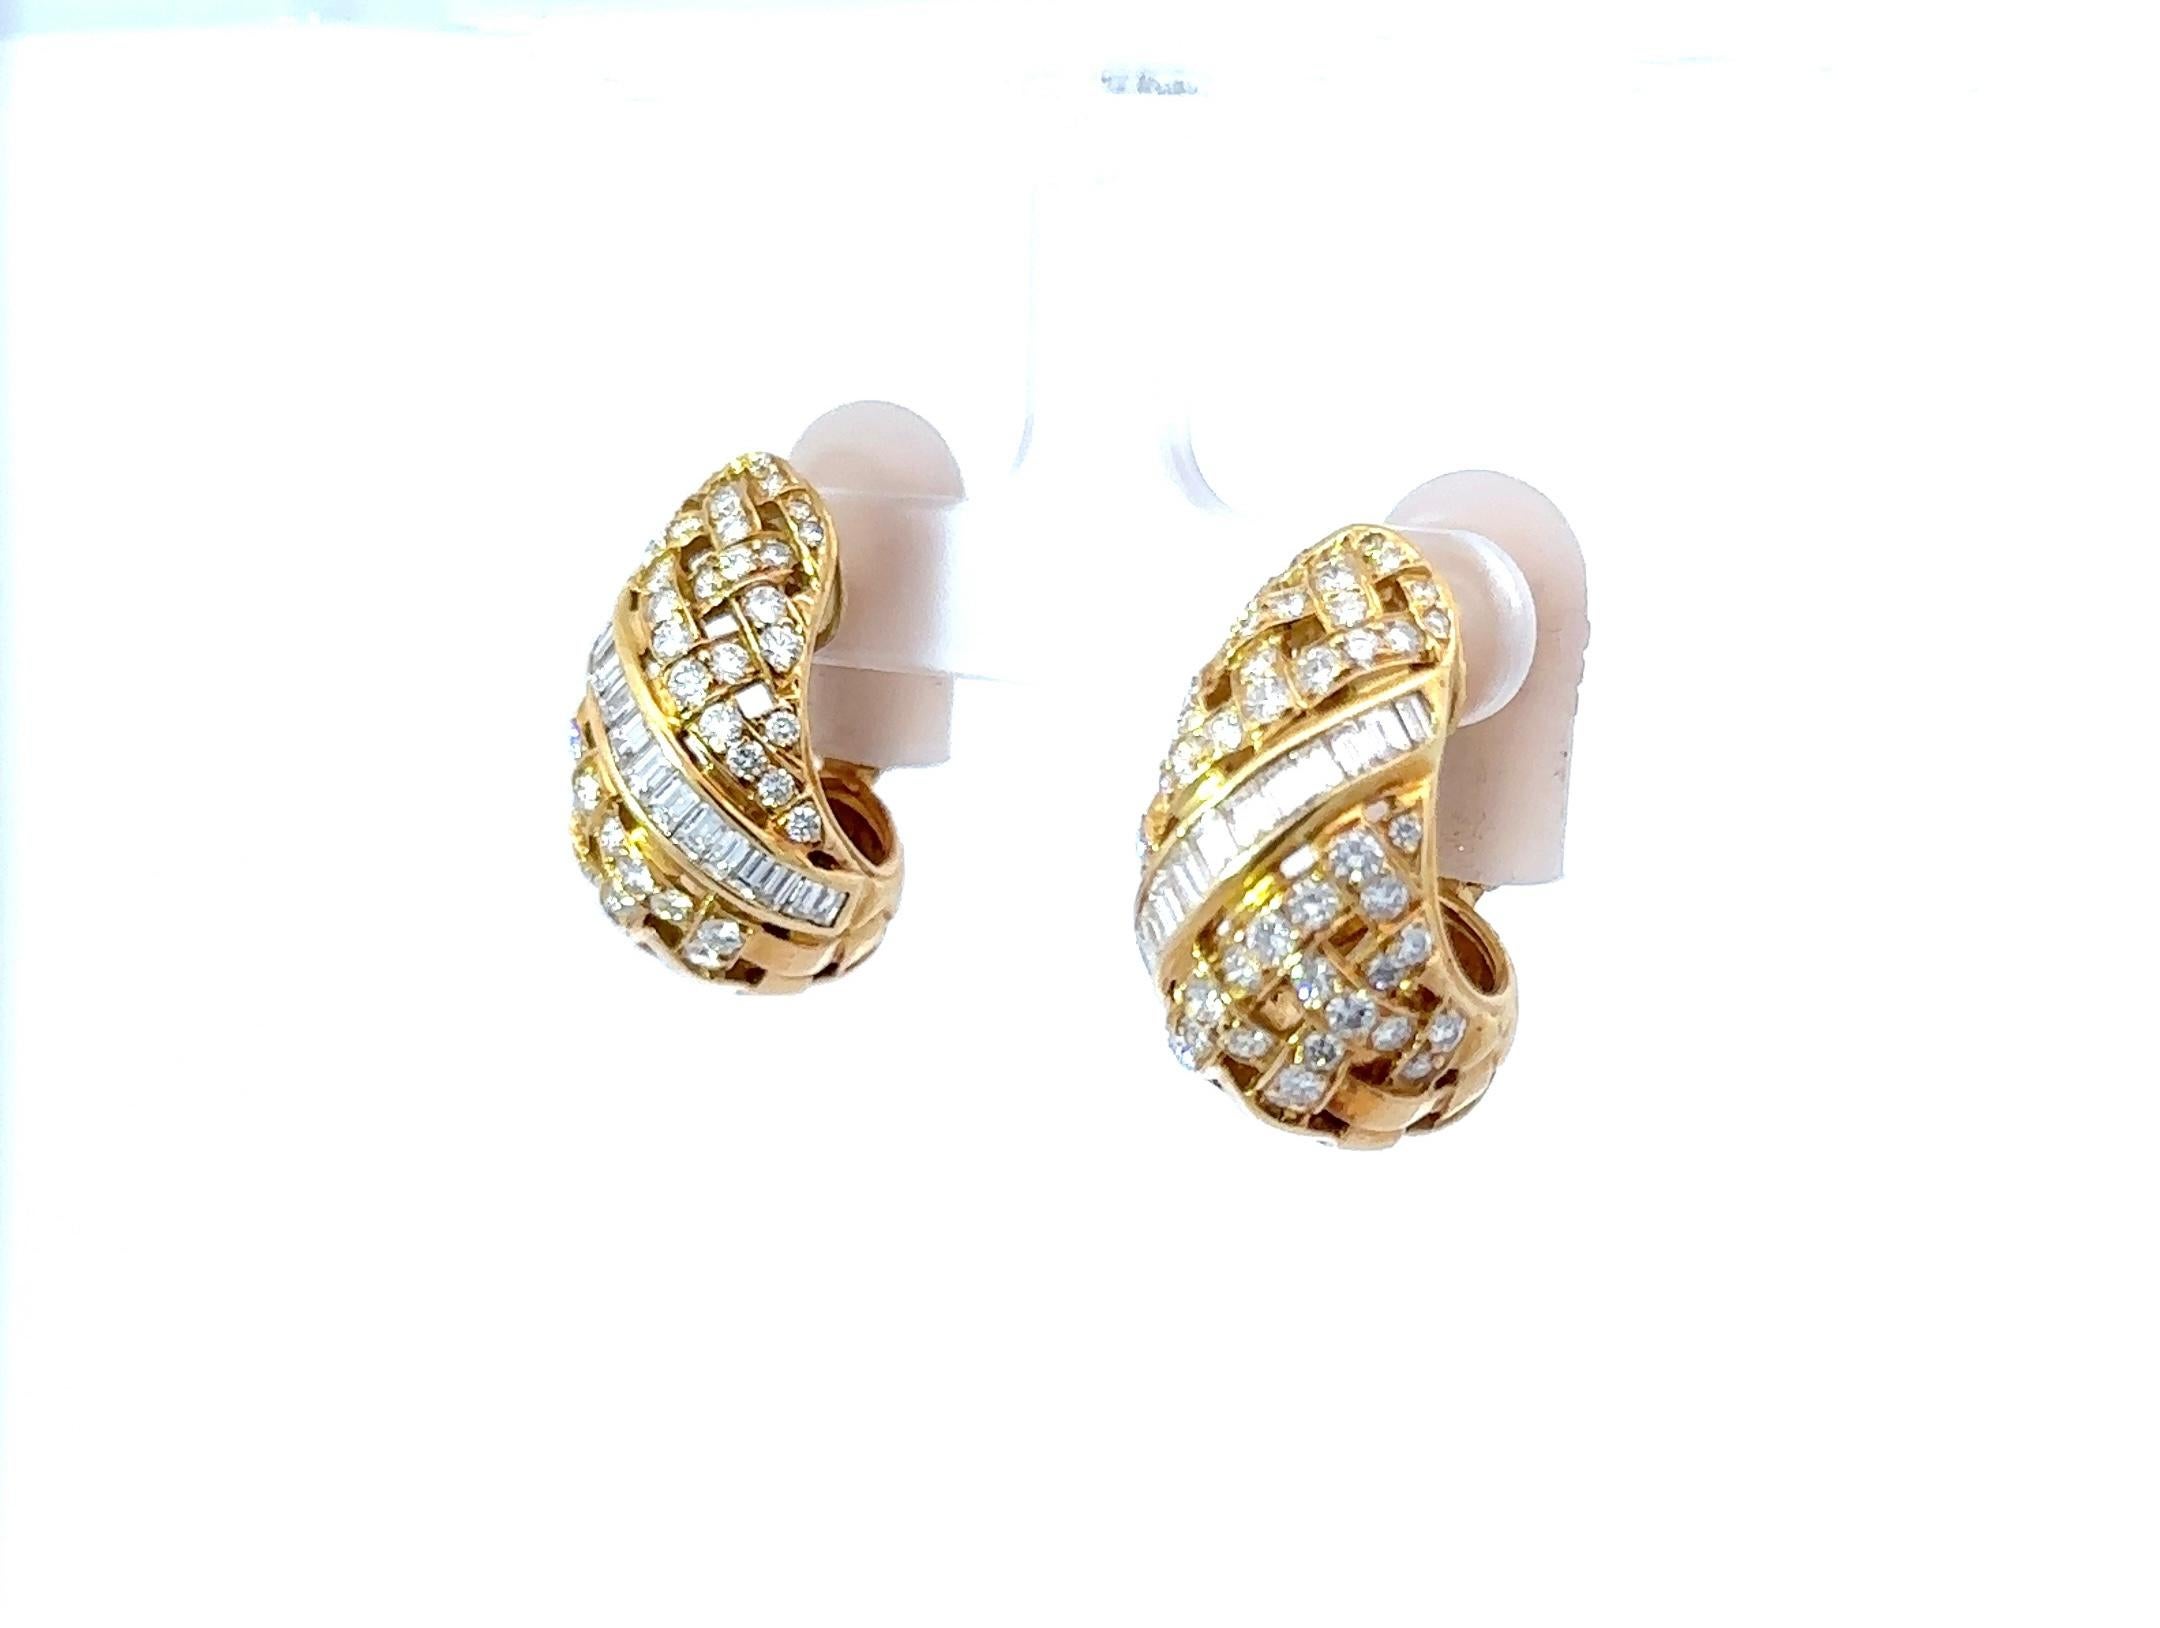 Tiffany and Co. Gold and Diamond Earrings In Good Condition For Sale In New York, NY